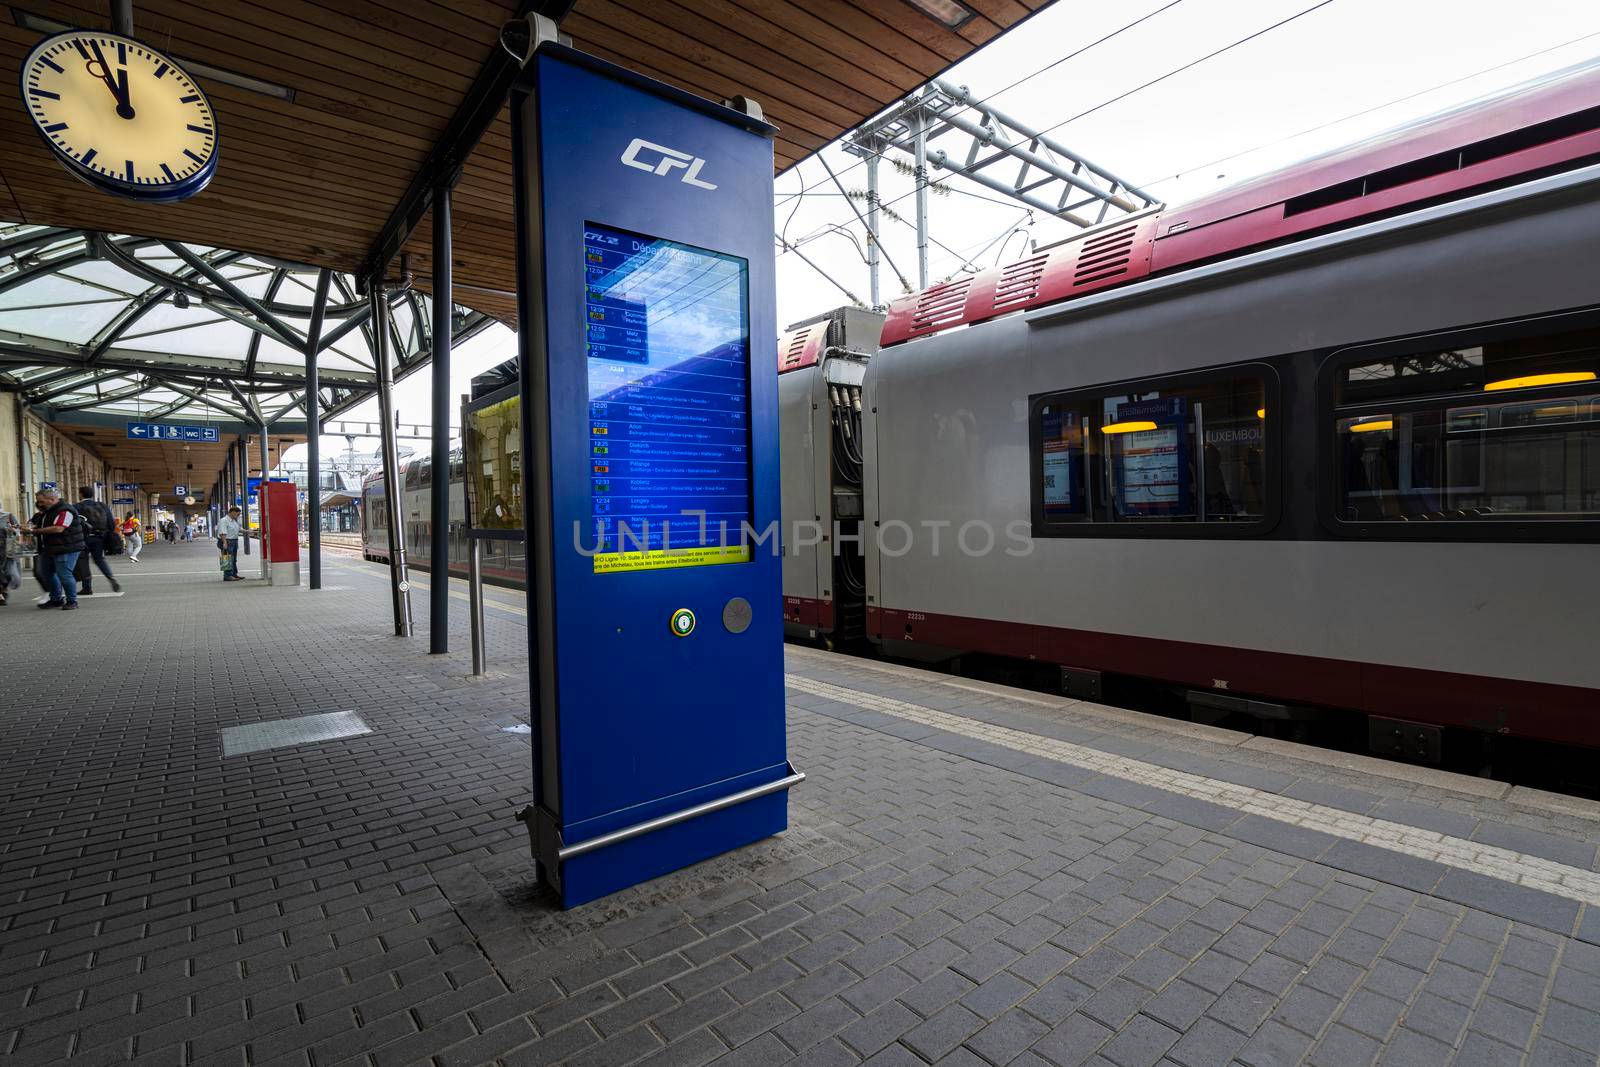 Luxembourg city, May 2022. view of the signs on the platform of the railway station